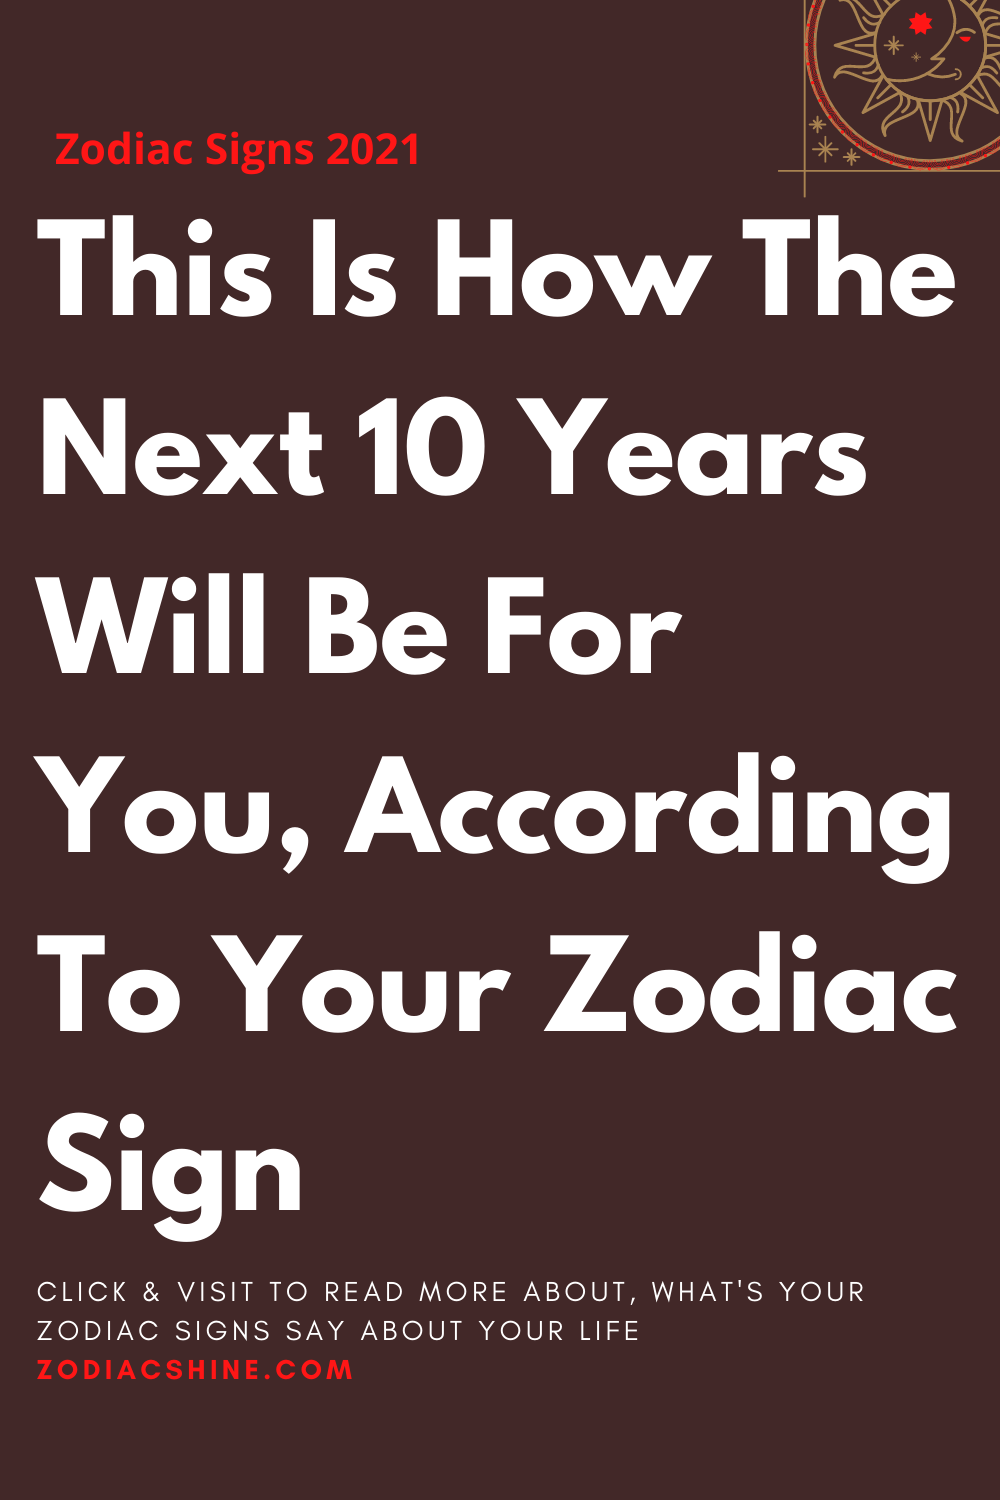 This Is How The Next 10 Years Will Be For You According To Your Zodiac Sign